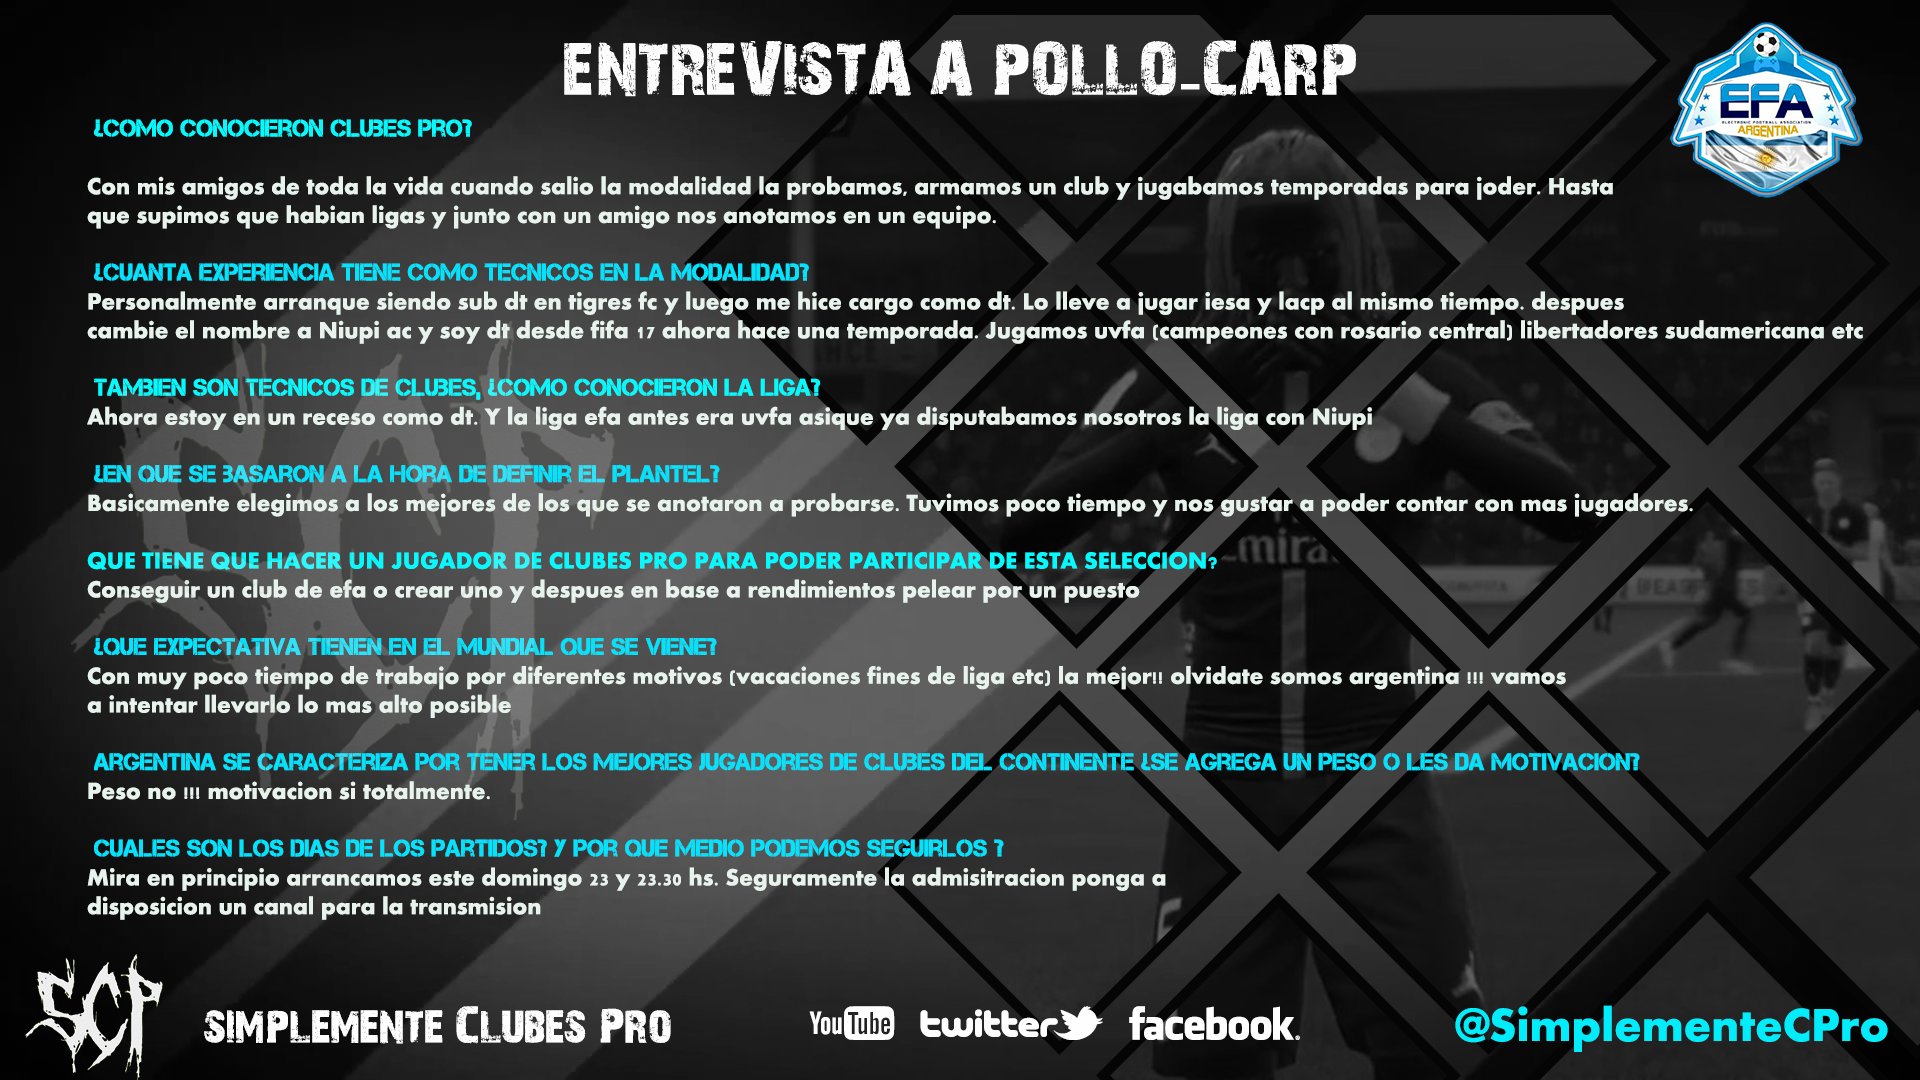 Simplemente Clubes Pro on Twitter: 